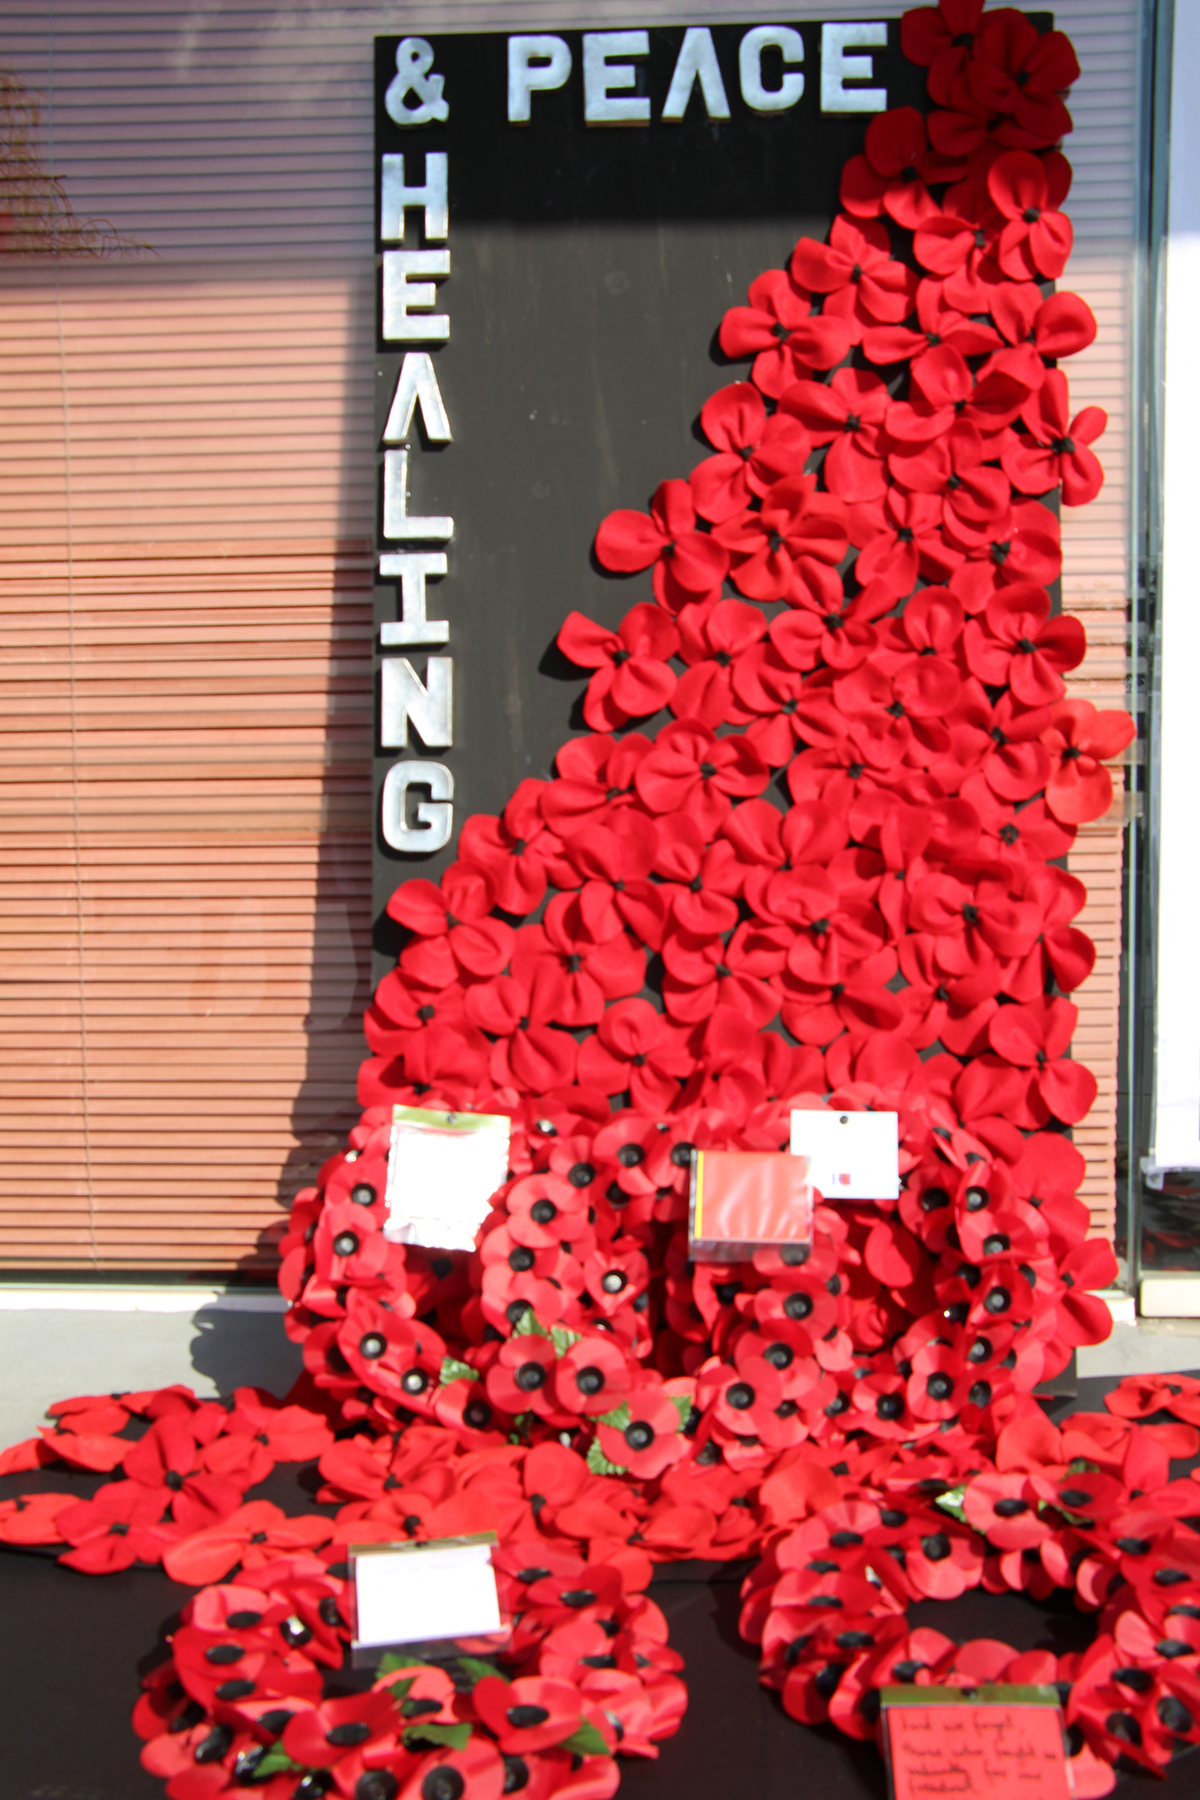 Remembrance Day Ceremony